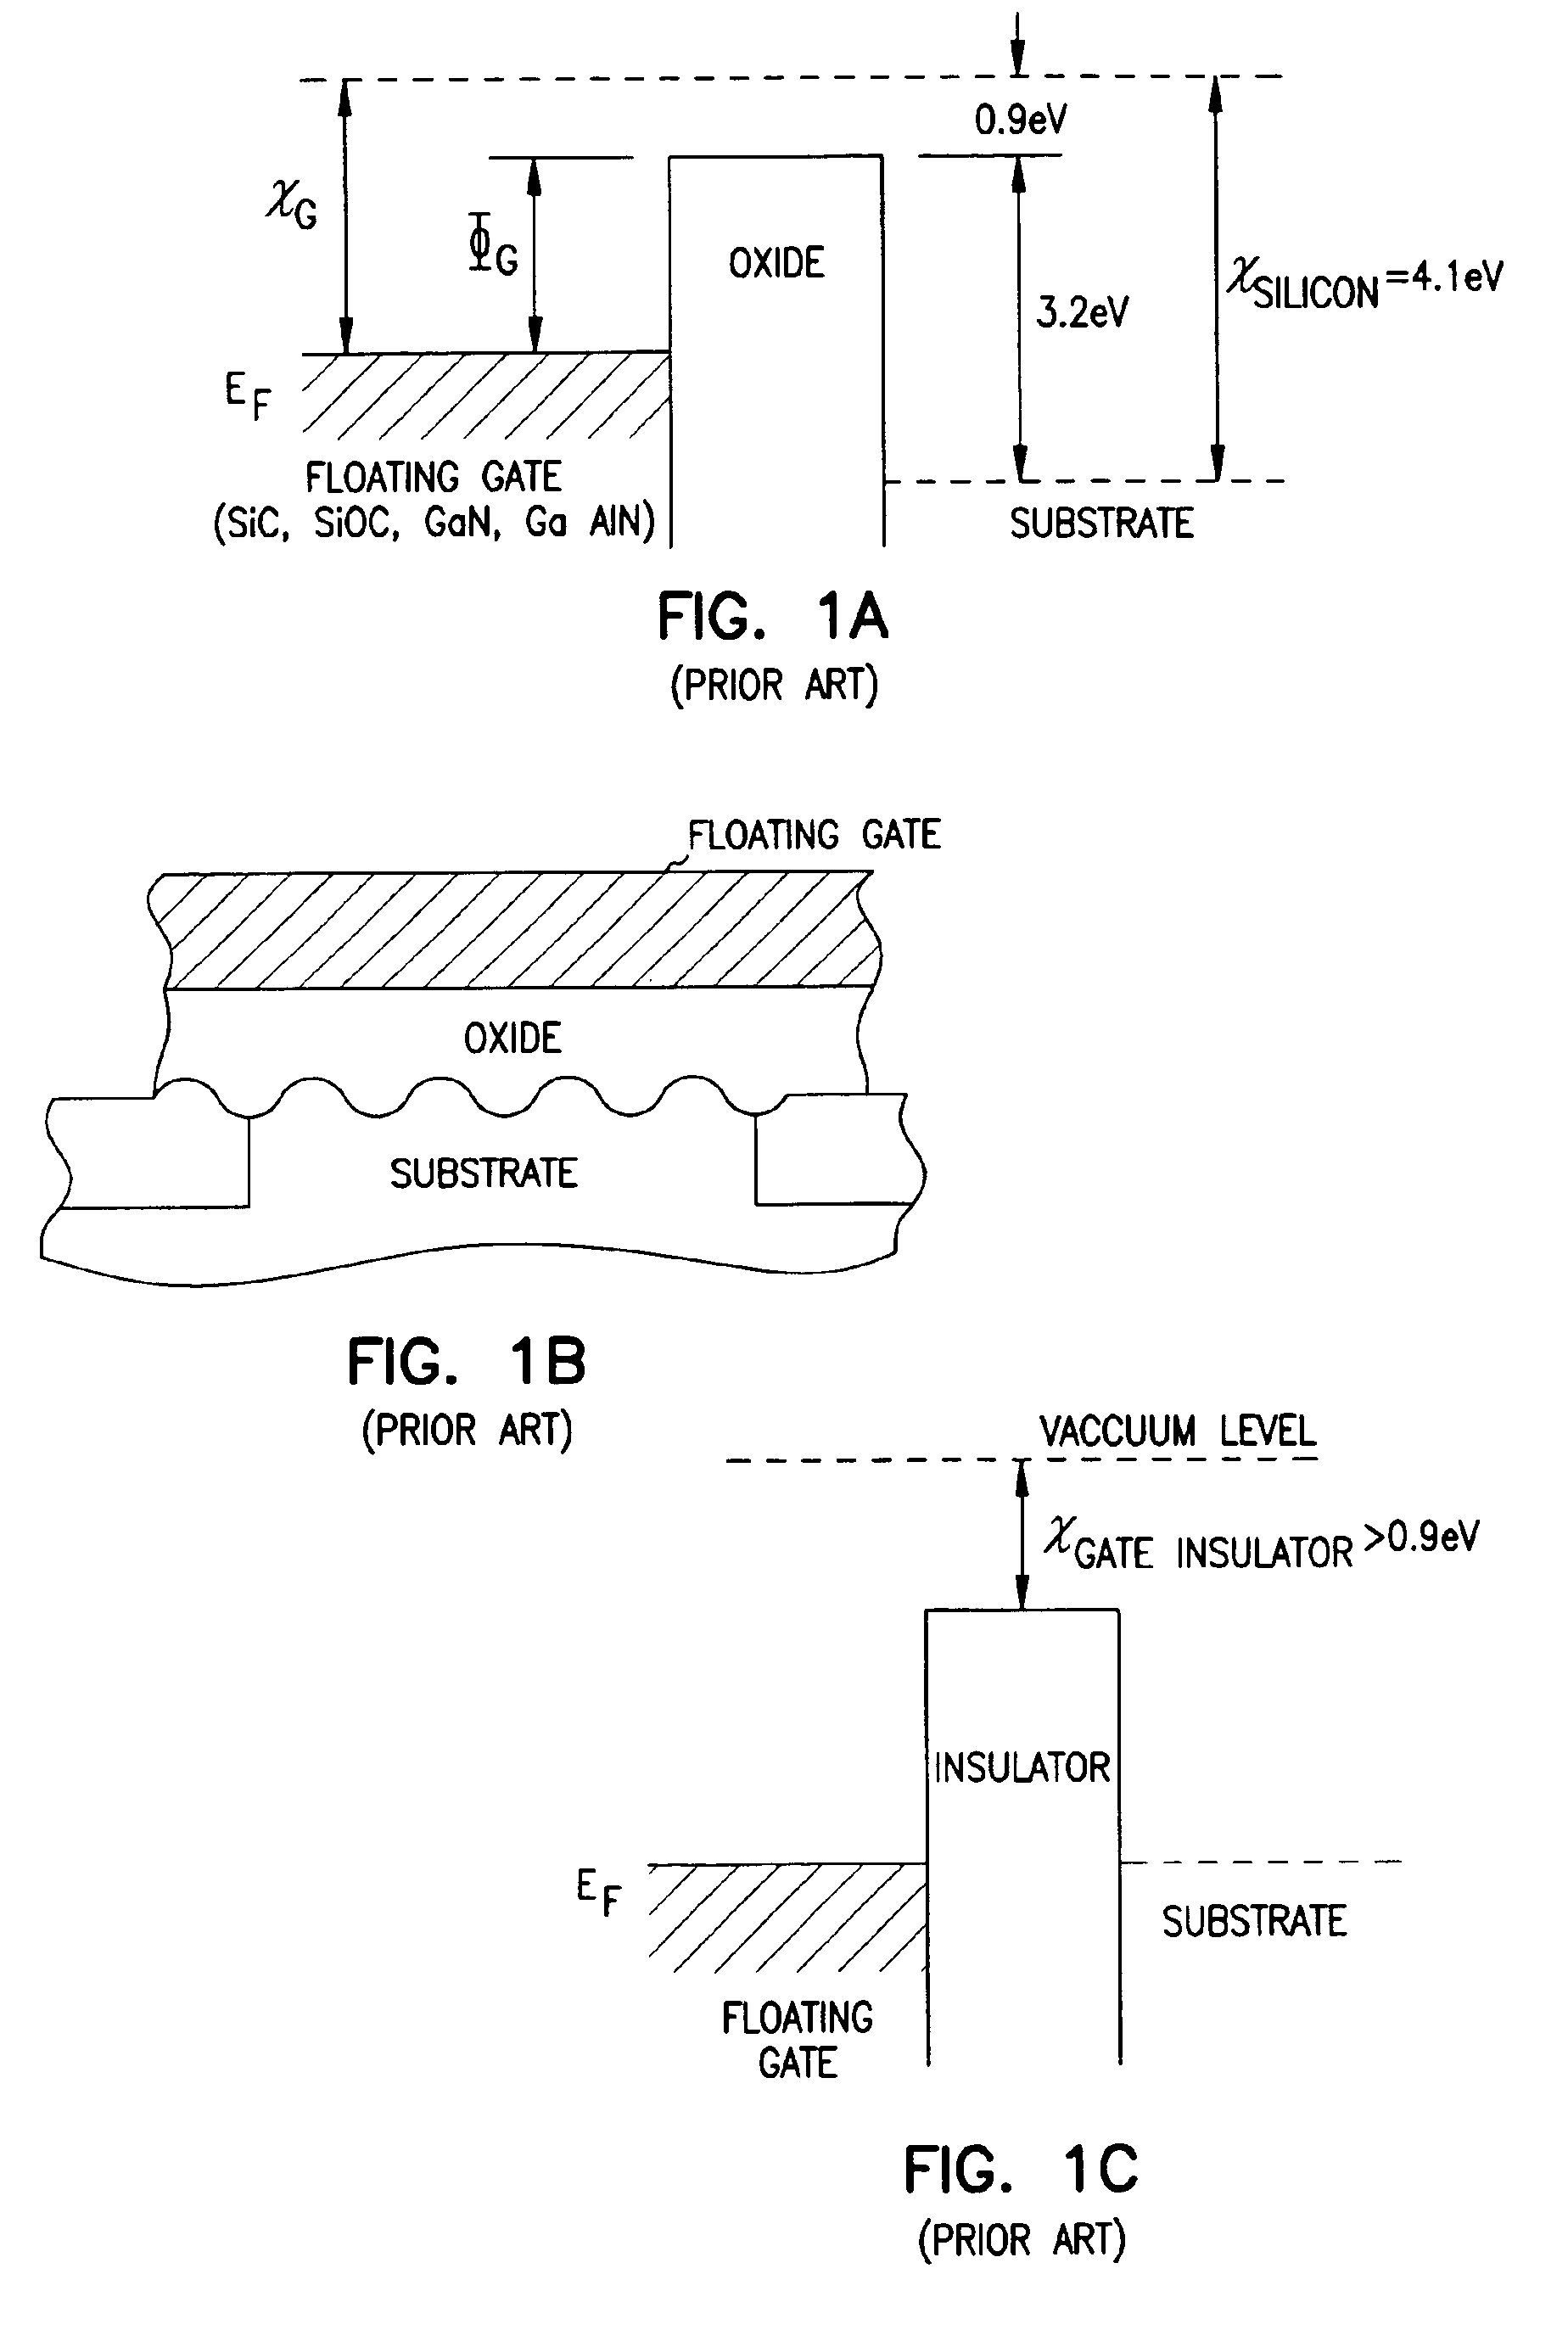 Programmable array logic or memory with p-channel devices and asymmetrical tunnel barriers